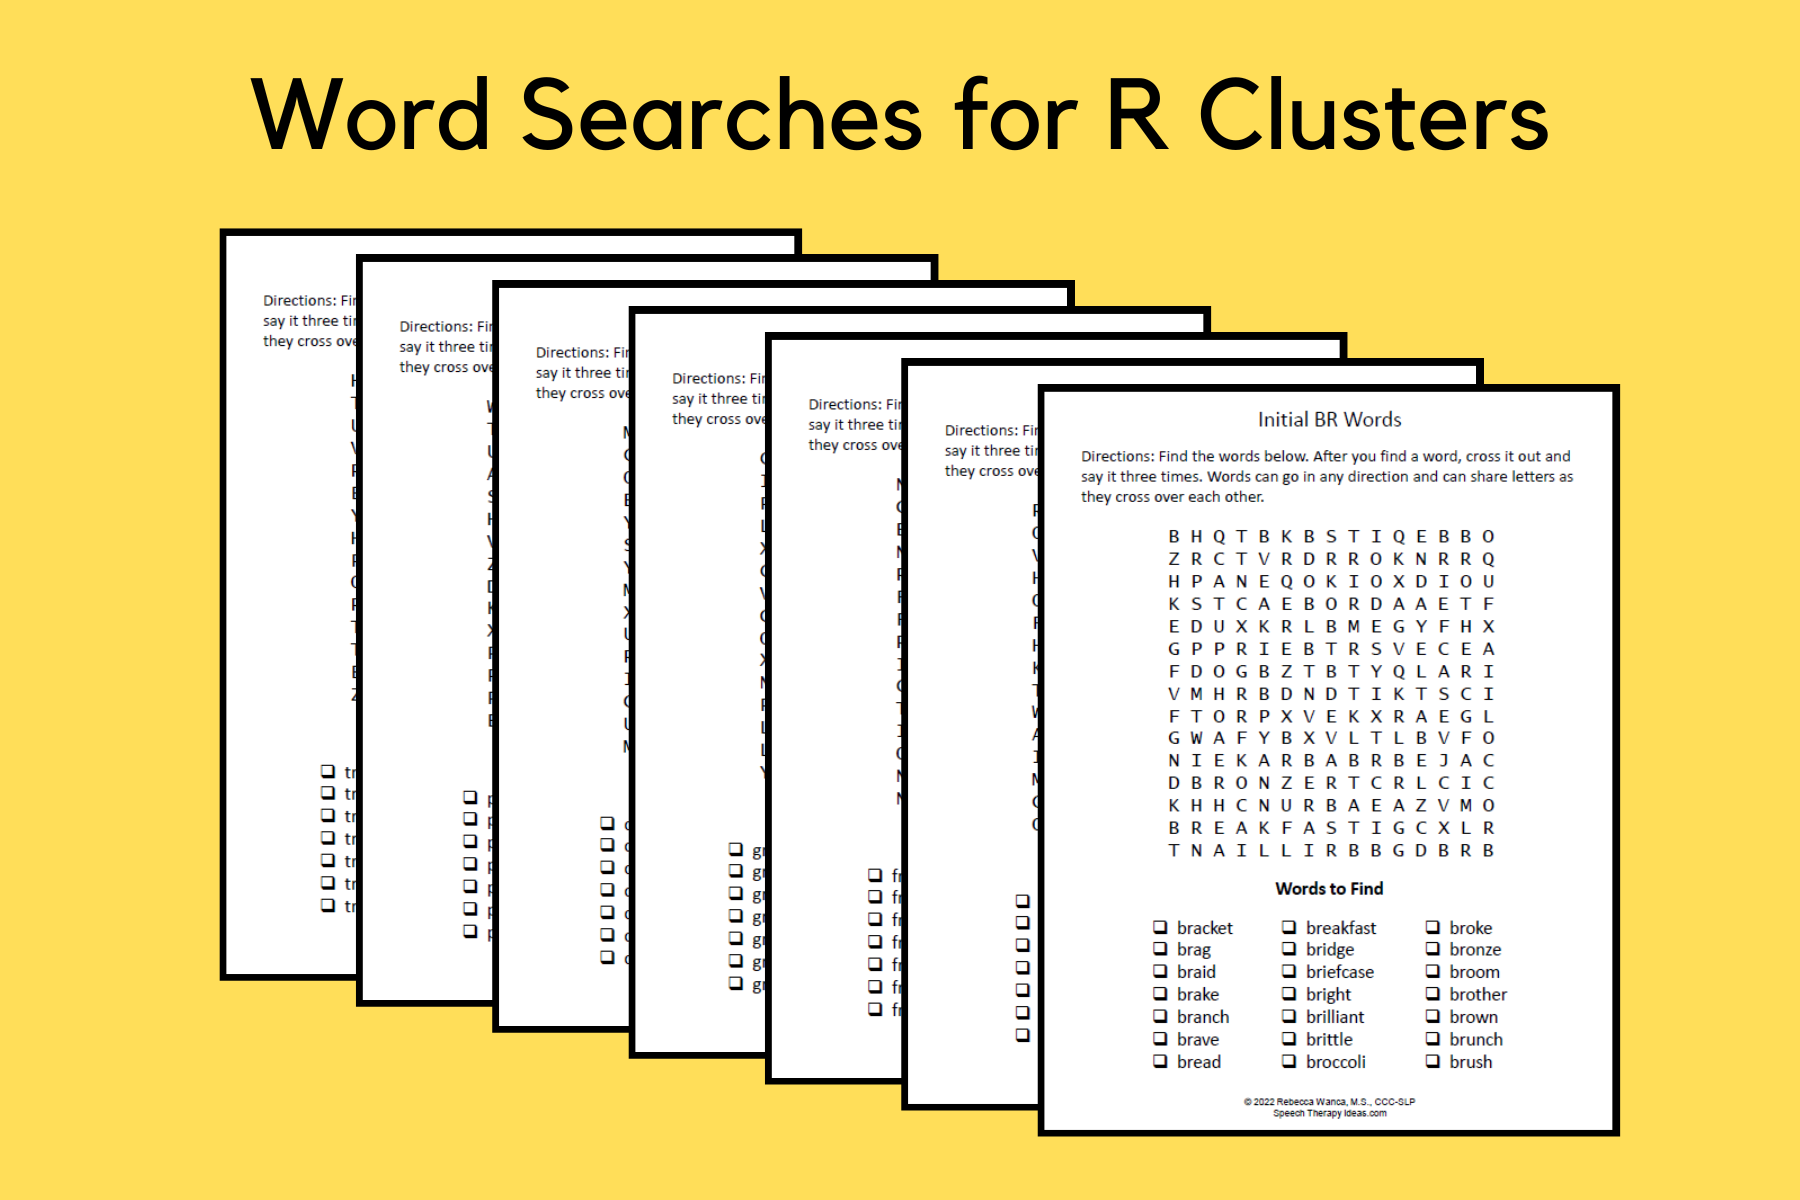 Word Searches for R Clusters